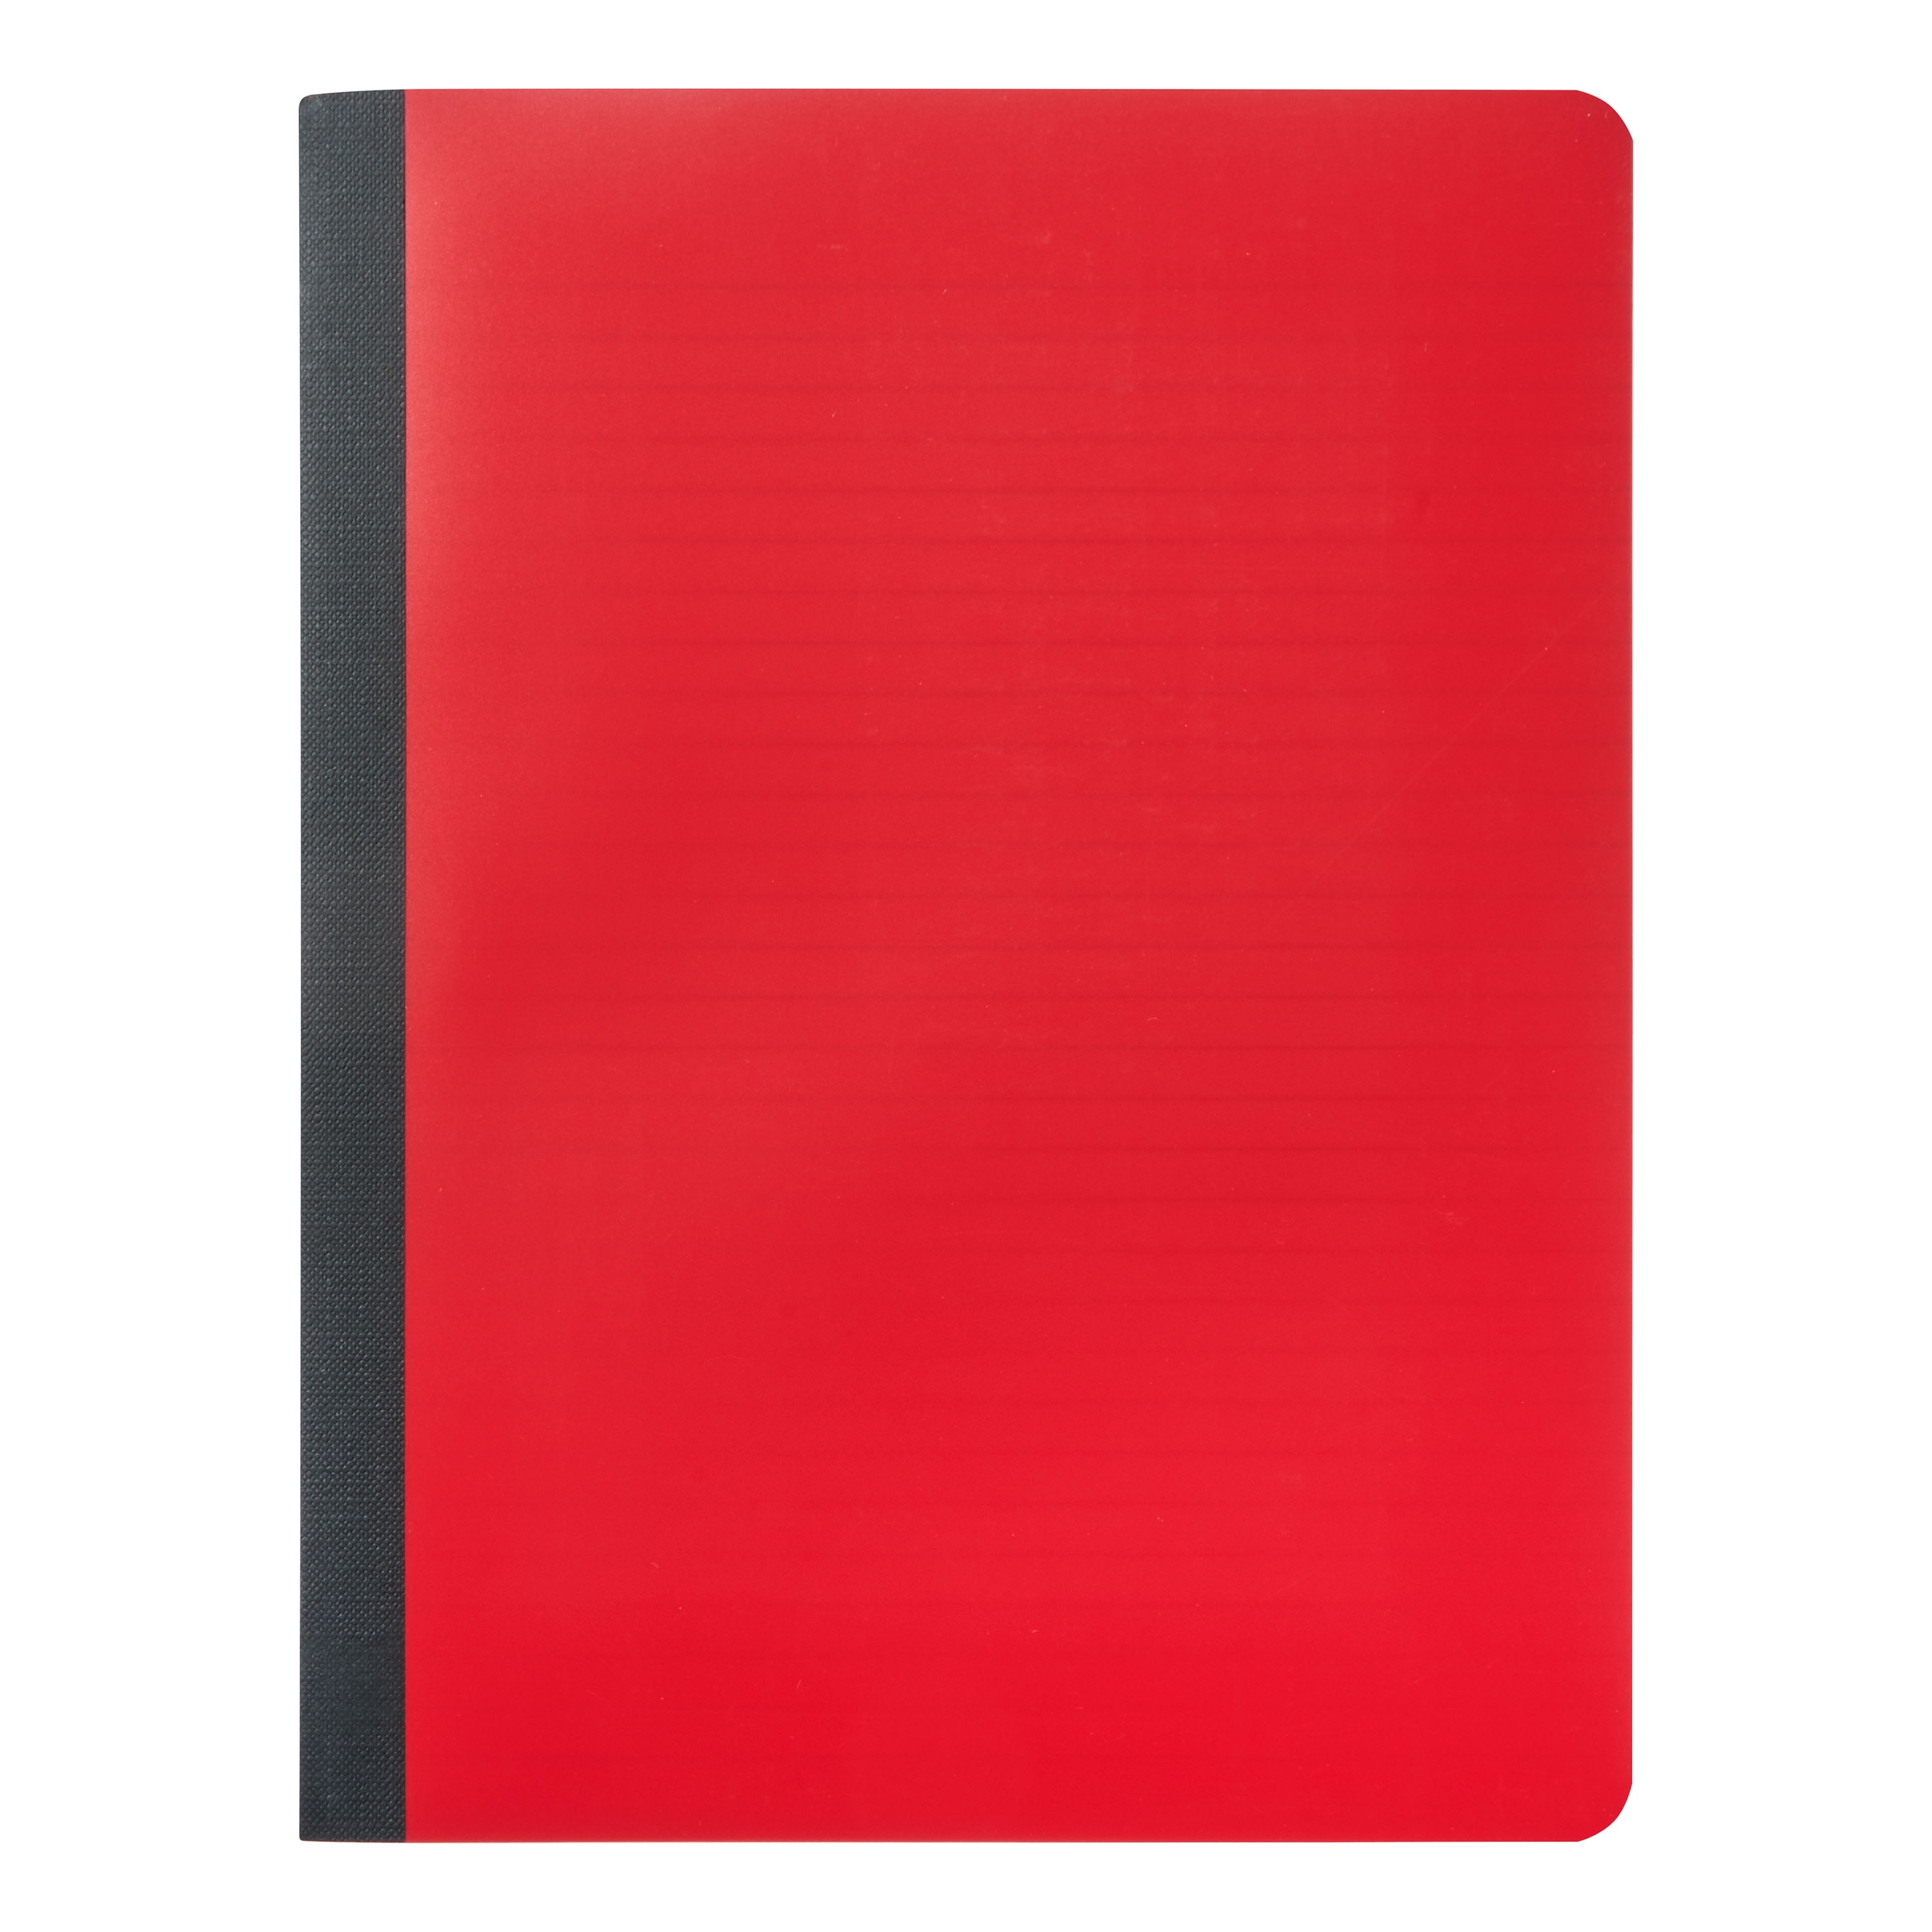 Pen + Gear Poly Composition Book, College Ruled, 80 Sheets, Red ...